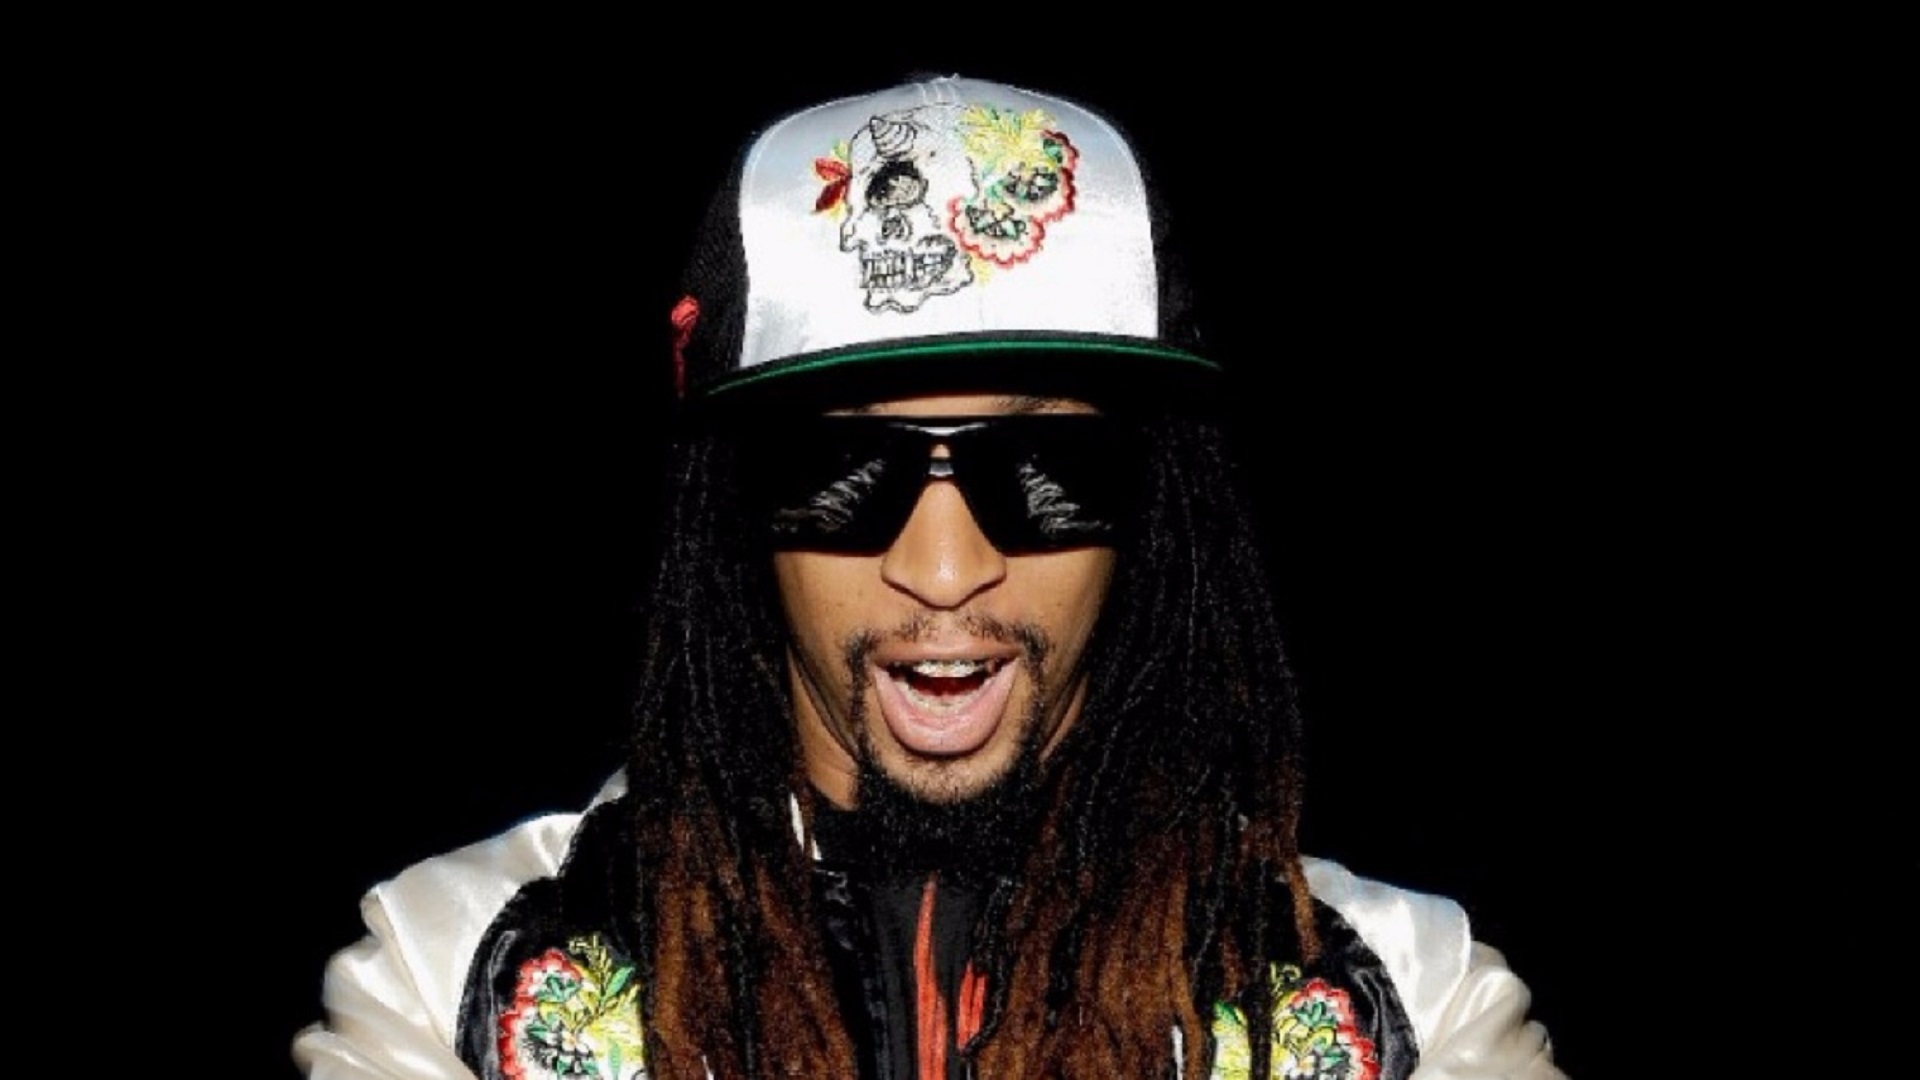 Lil Jon Wallpapers Images Photos Pictures Backgrounds.